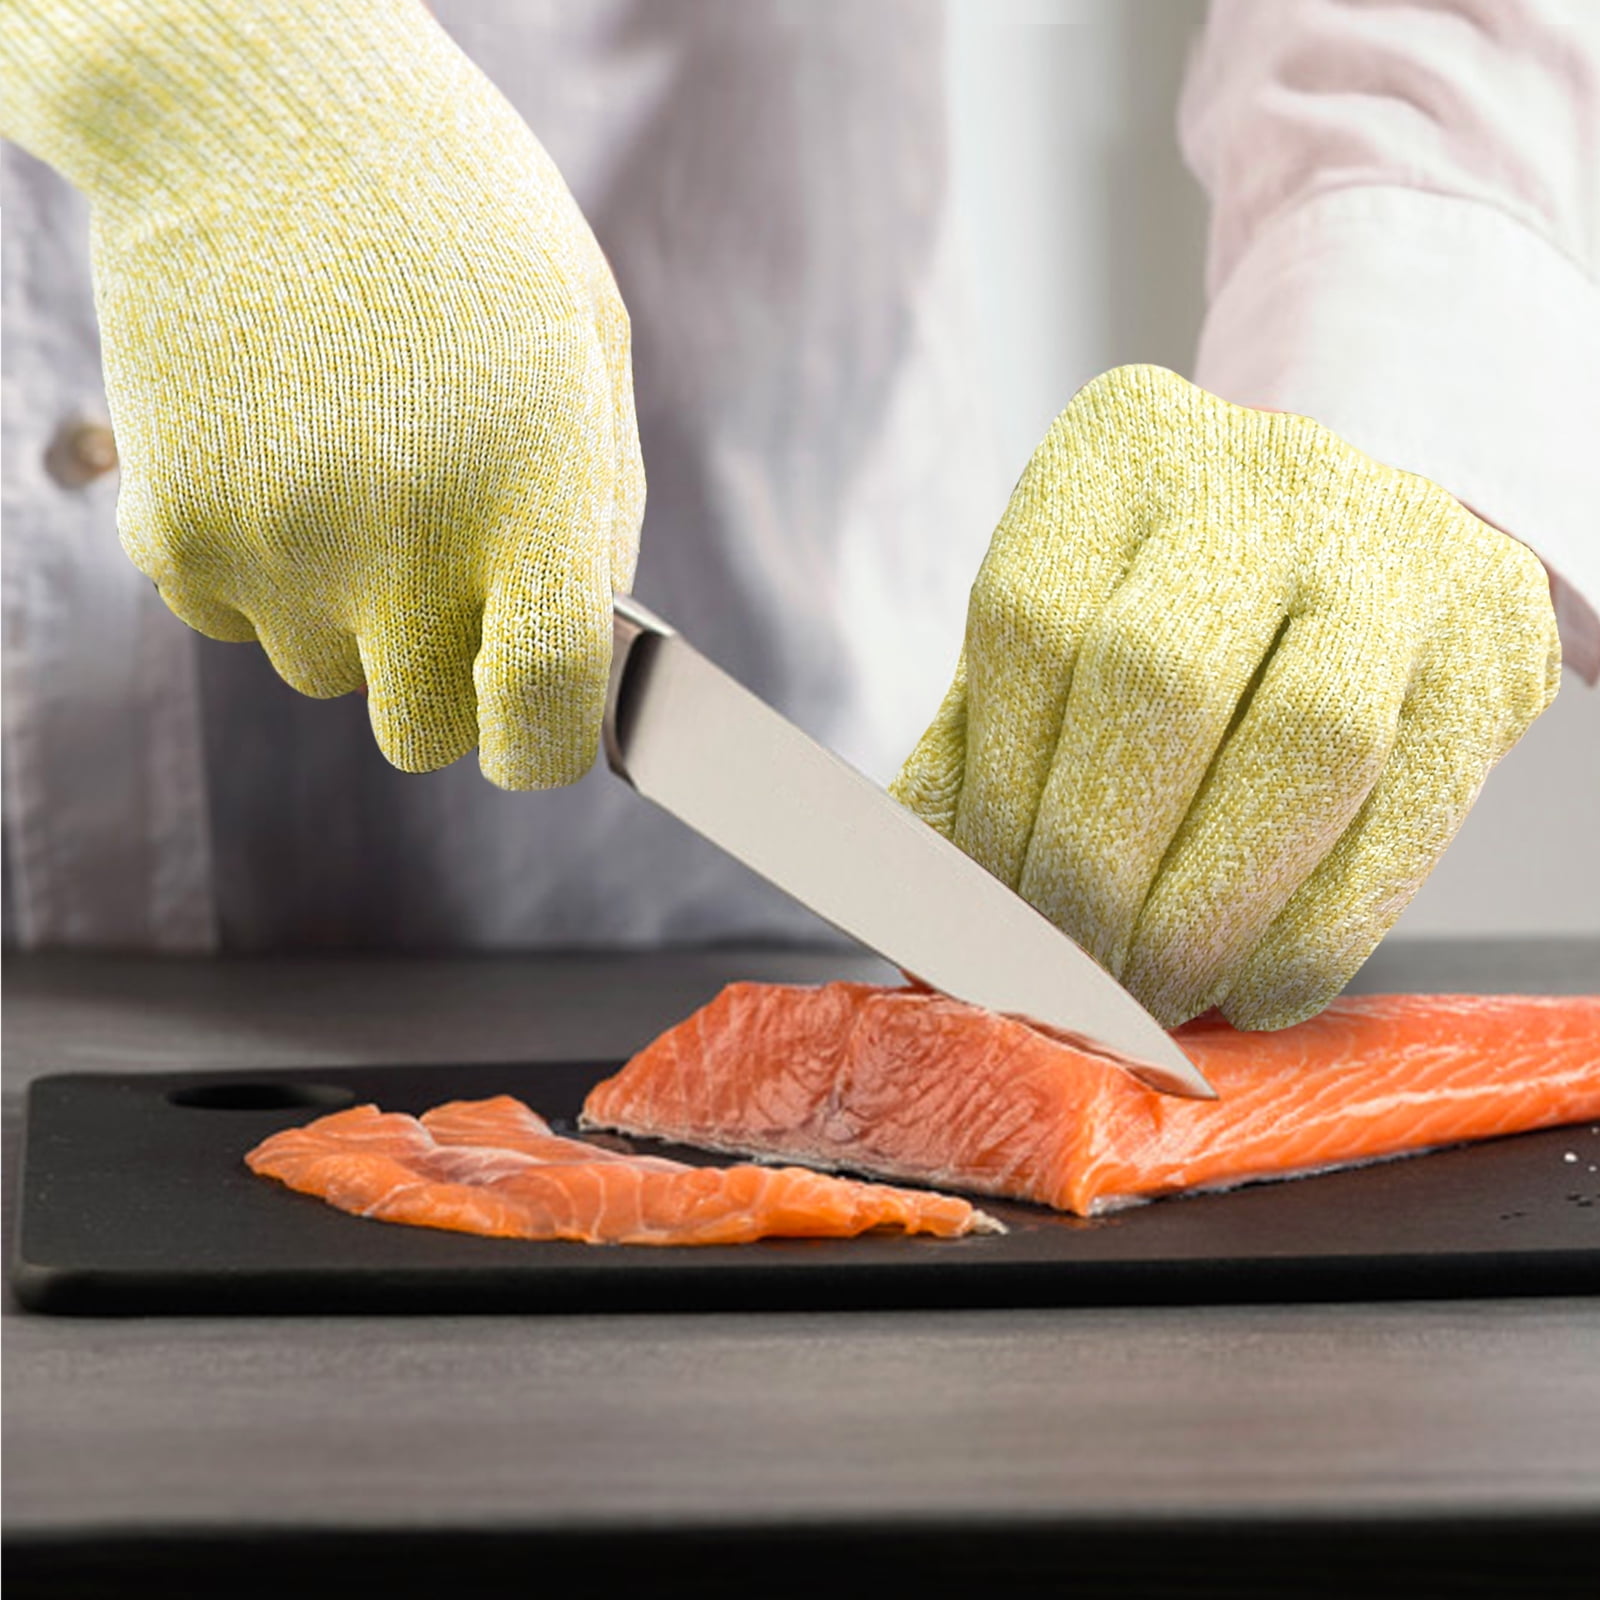 HereToGear Cut Resistant Gloves - 2 PAIRS Small - Food Grade, Level 5  Protection from Kitchen Knives - Great while Shucking Oysters